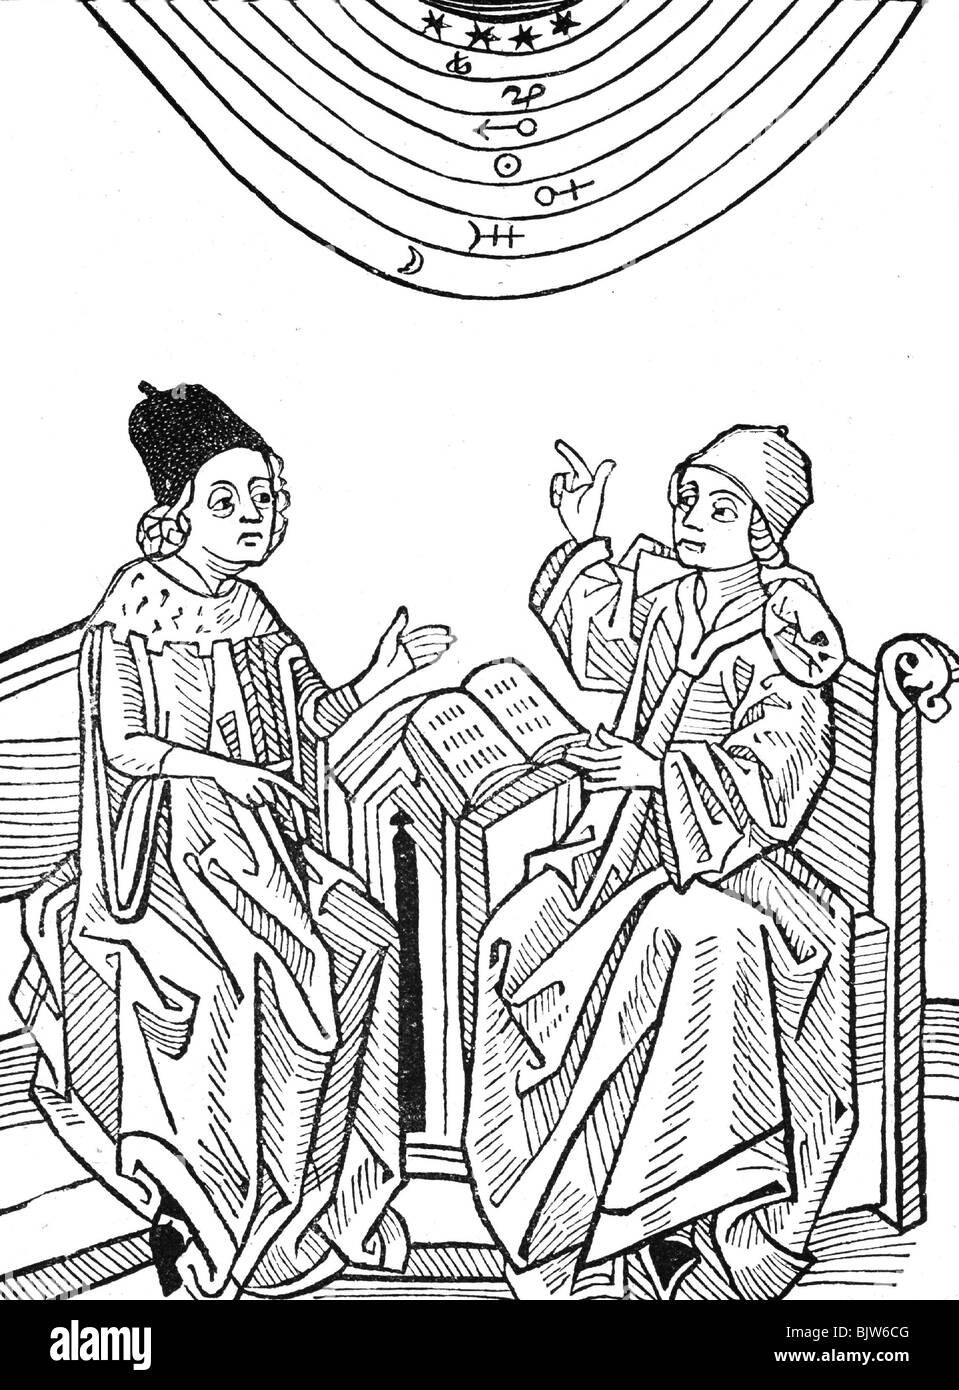 astrology, astrologers, school of astrologers, after anonymous image, woodcut, historic, historical, people, Stock Photo